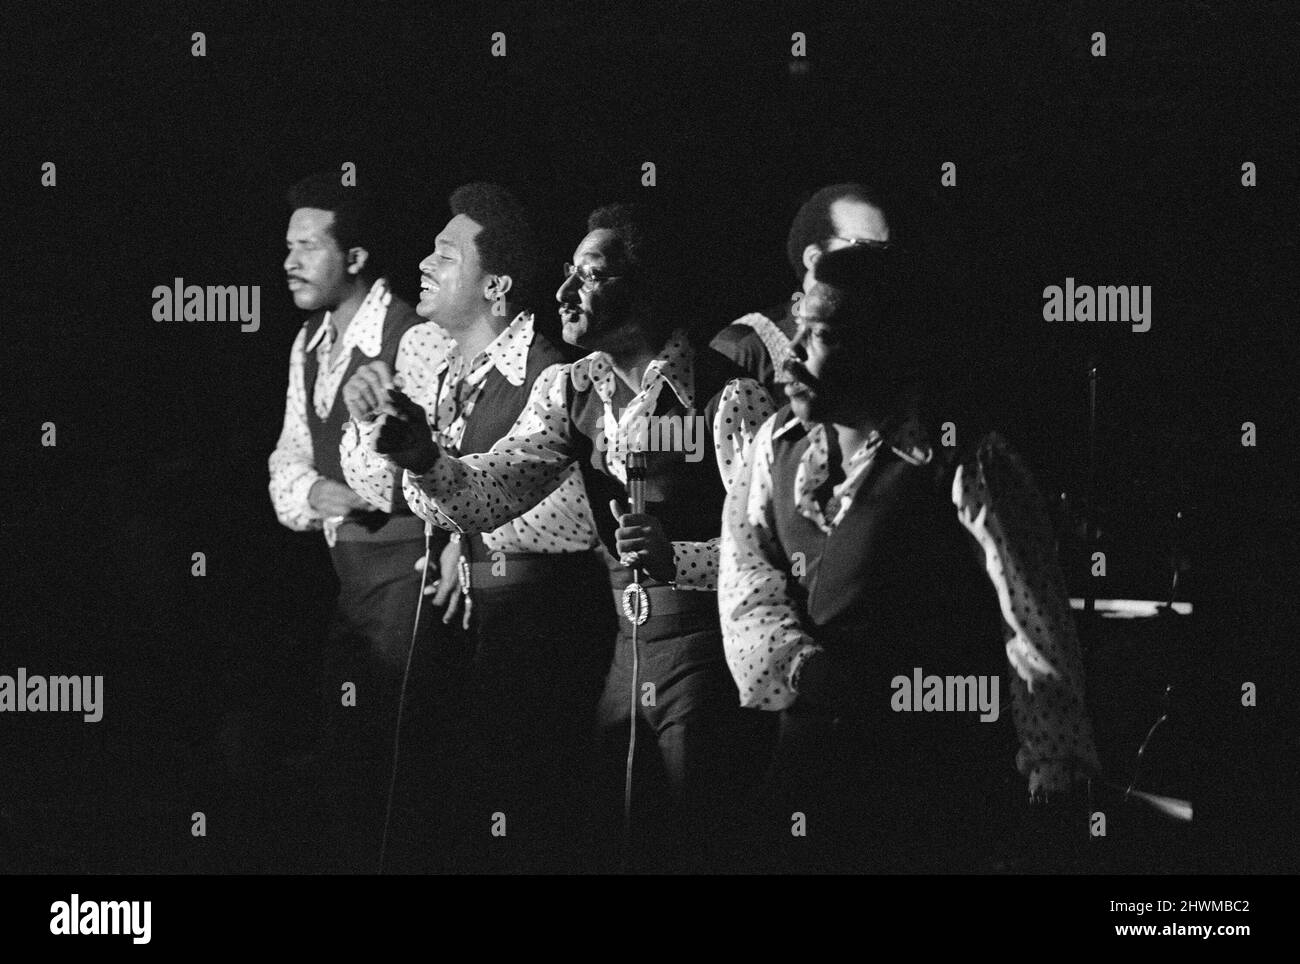 The Four Tops performing at Fiesta. Circa 1973 Stock Photo